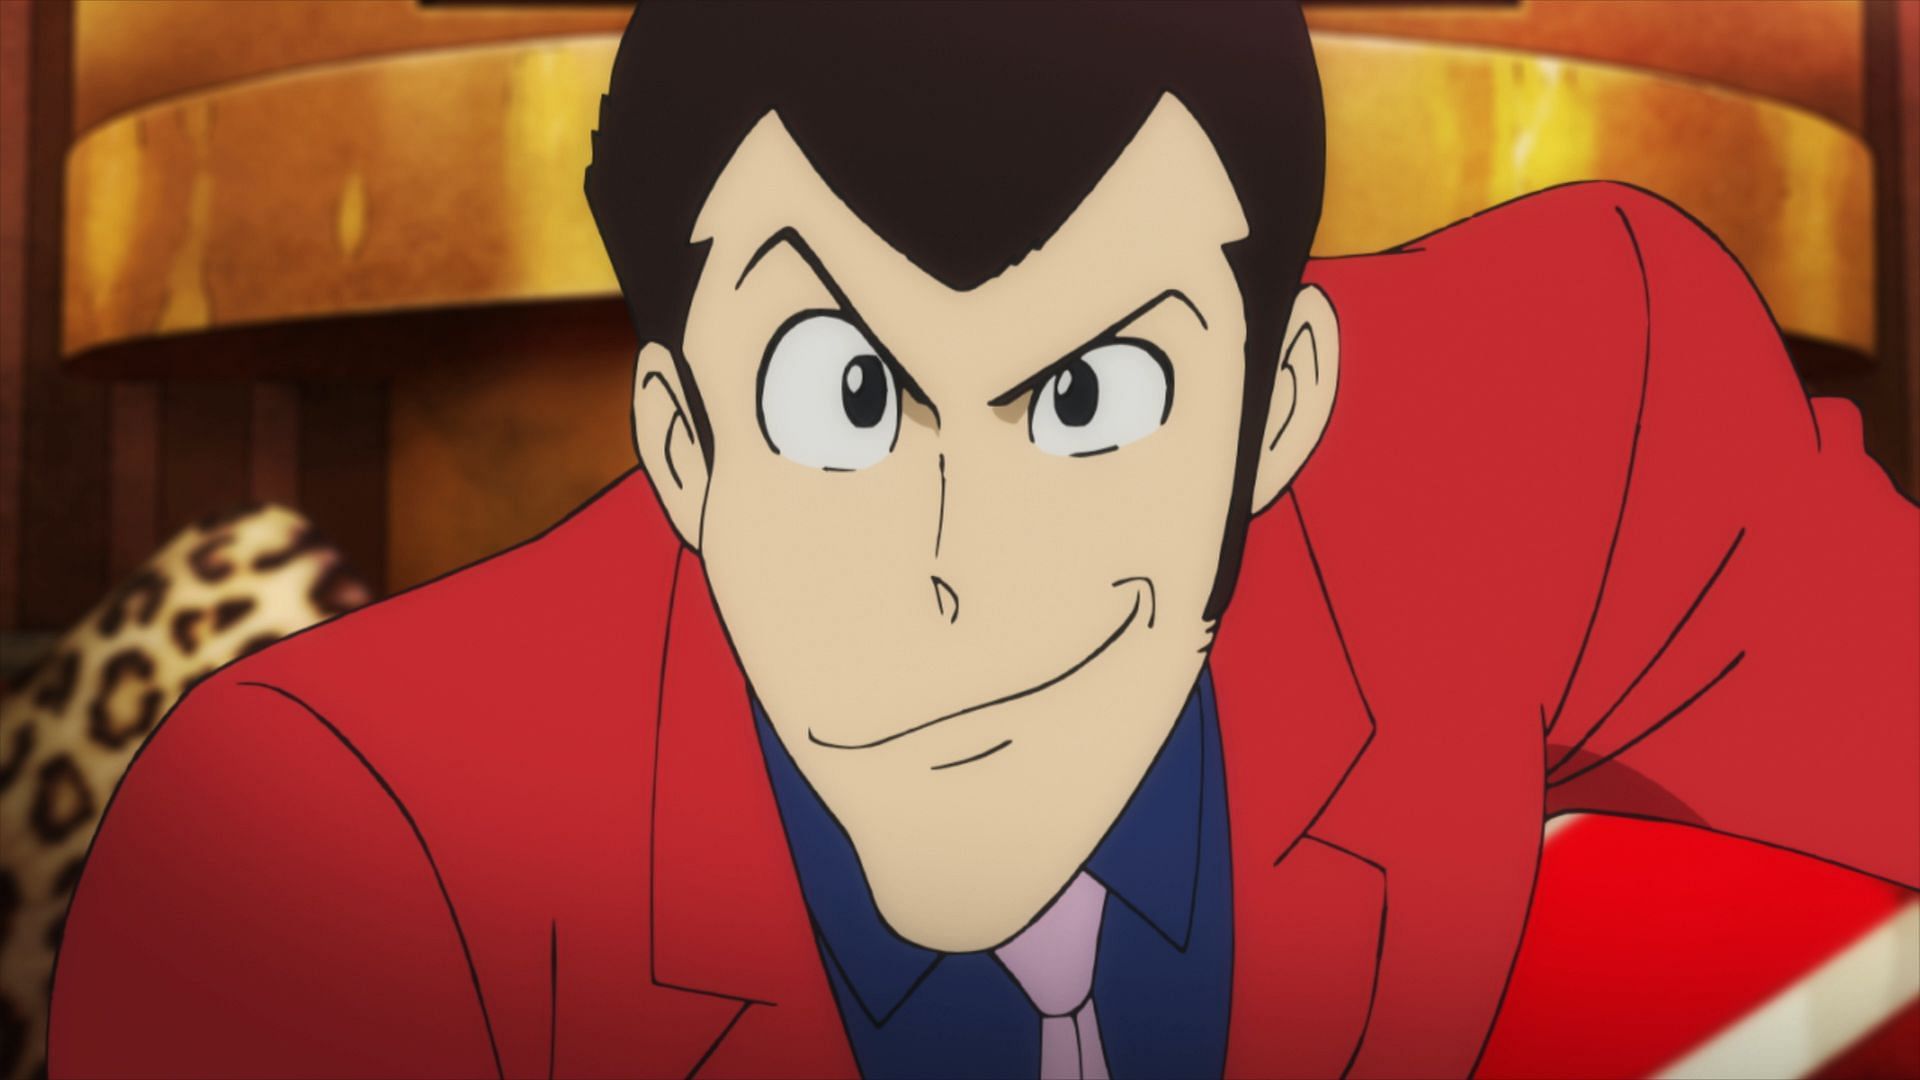 Lupin III&#039;s timeless relevance merits the attention of even the most aloof Gen-Z anime fans (Image Credits: Monkey Punch/Futabasha, Tokyopop, Lupin III)